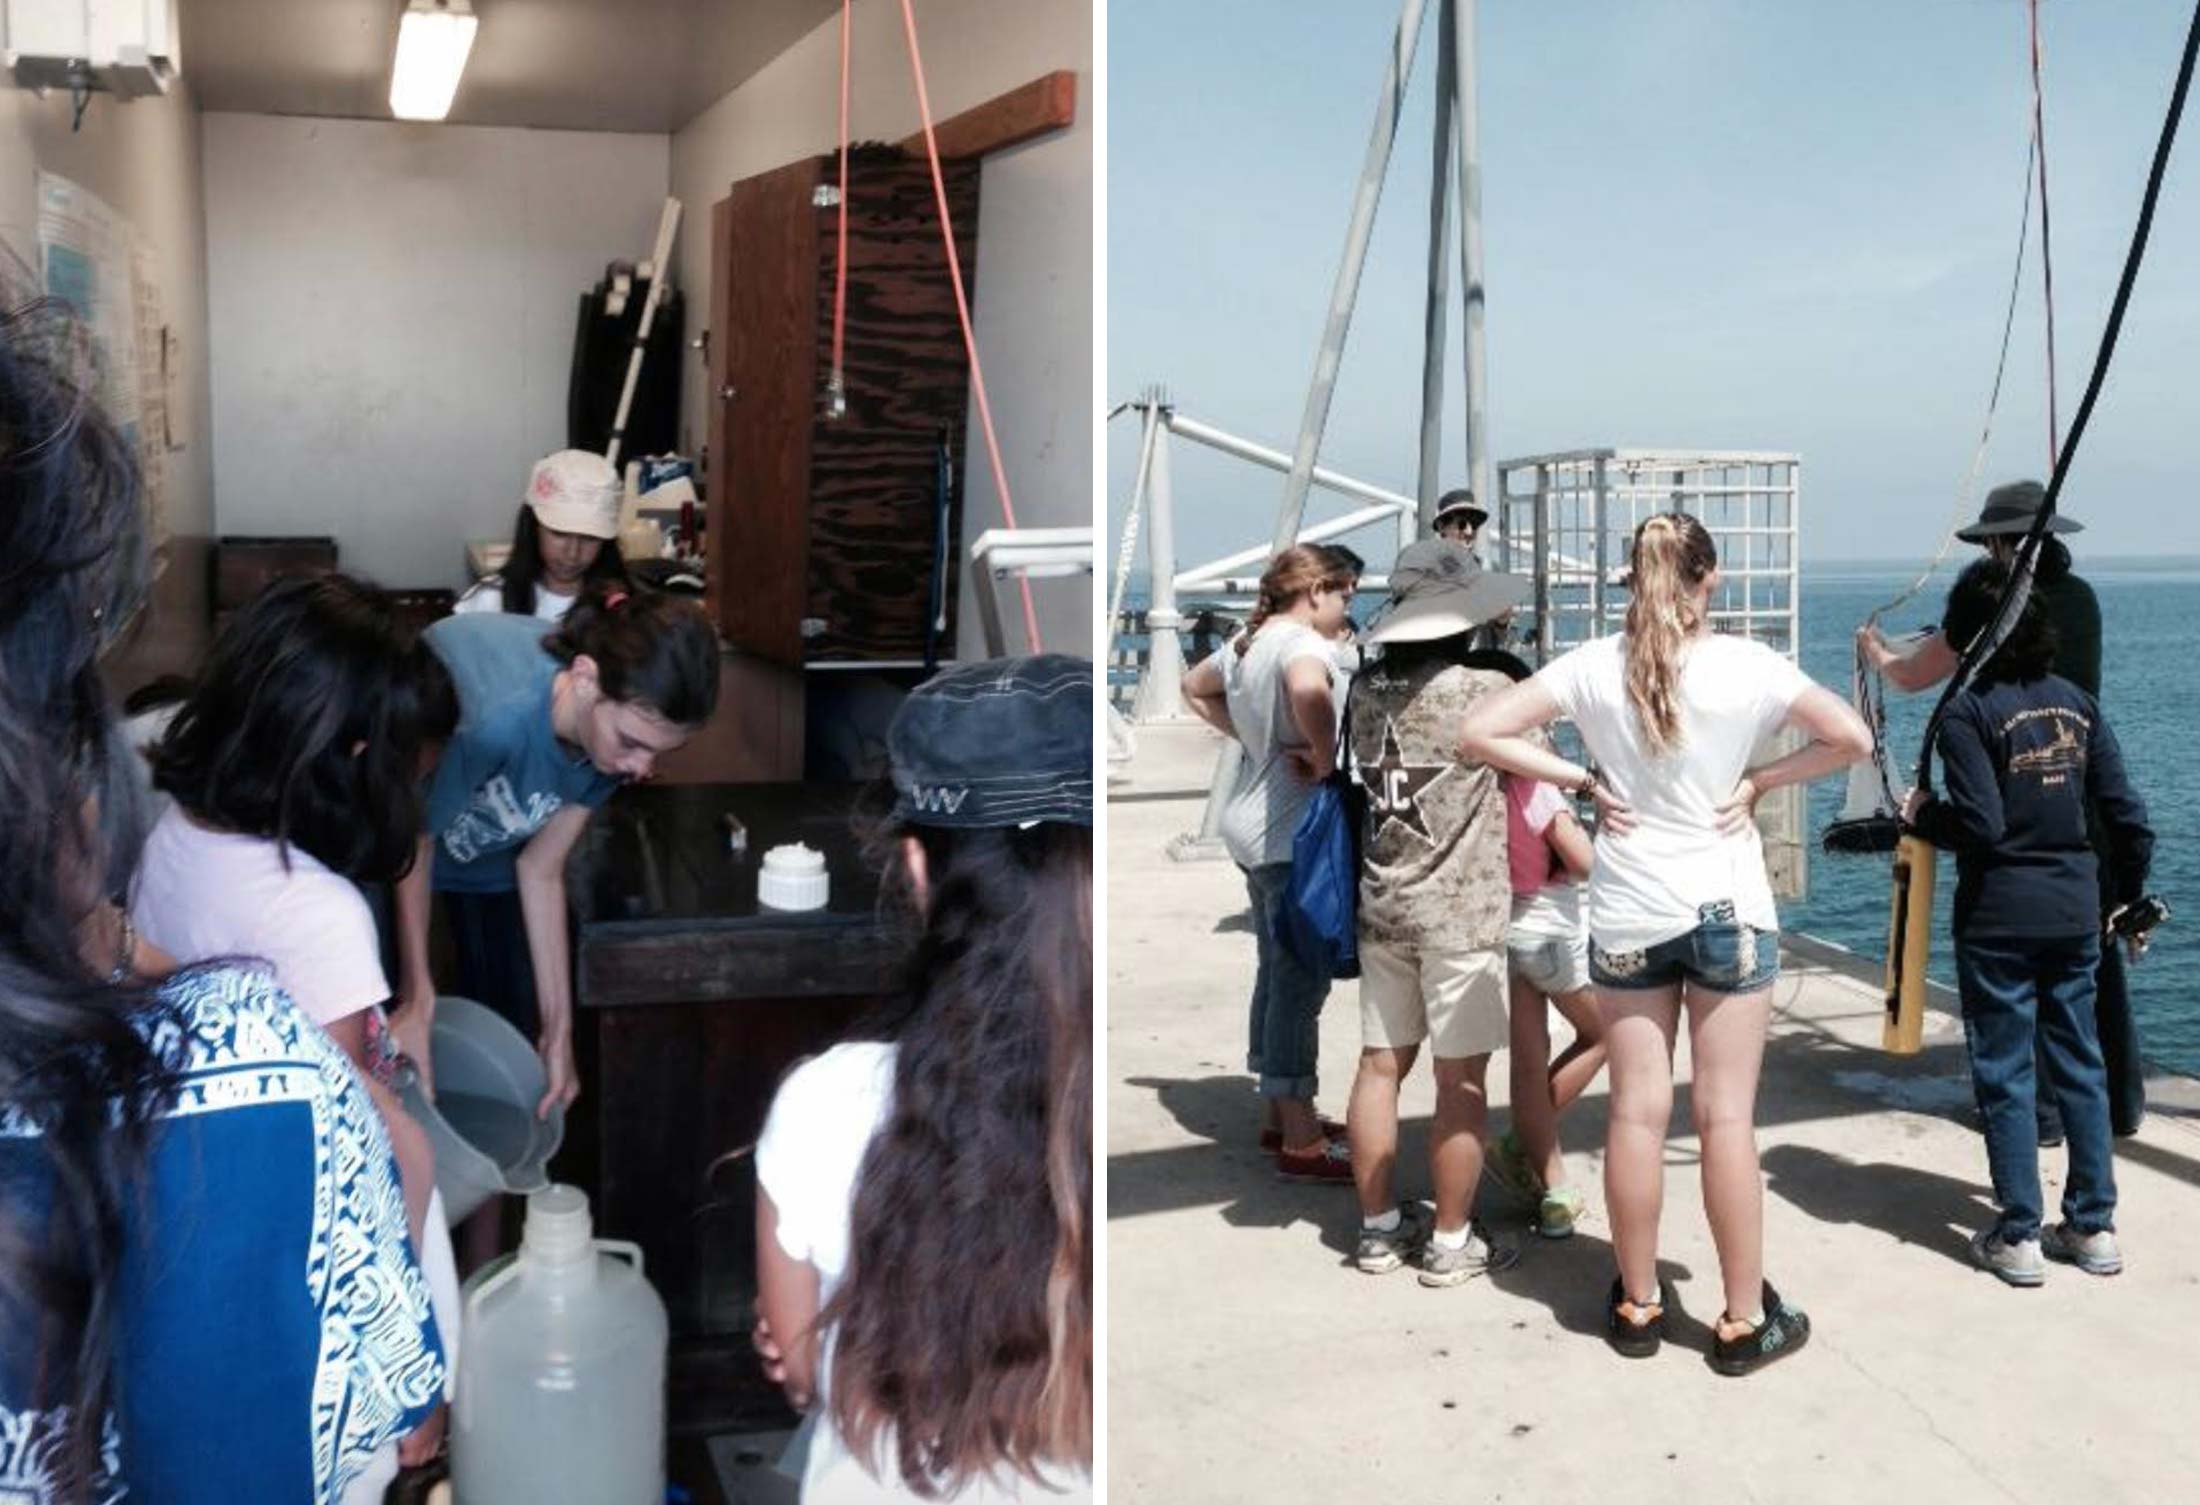 Ocean Sampling Day 2014 with local Girl Scout groups.